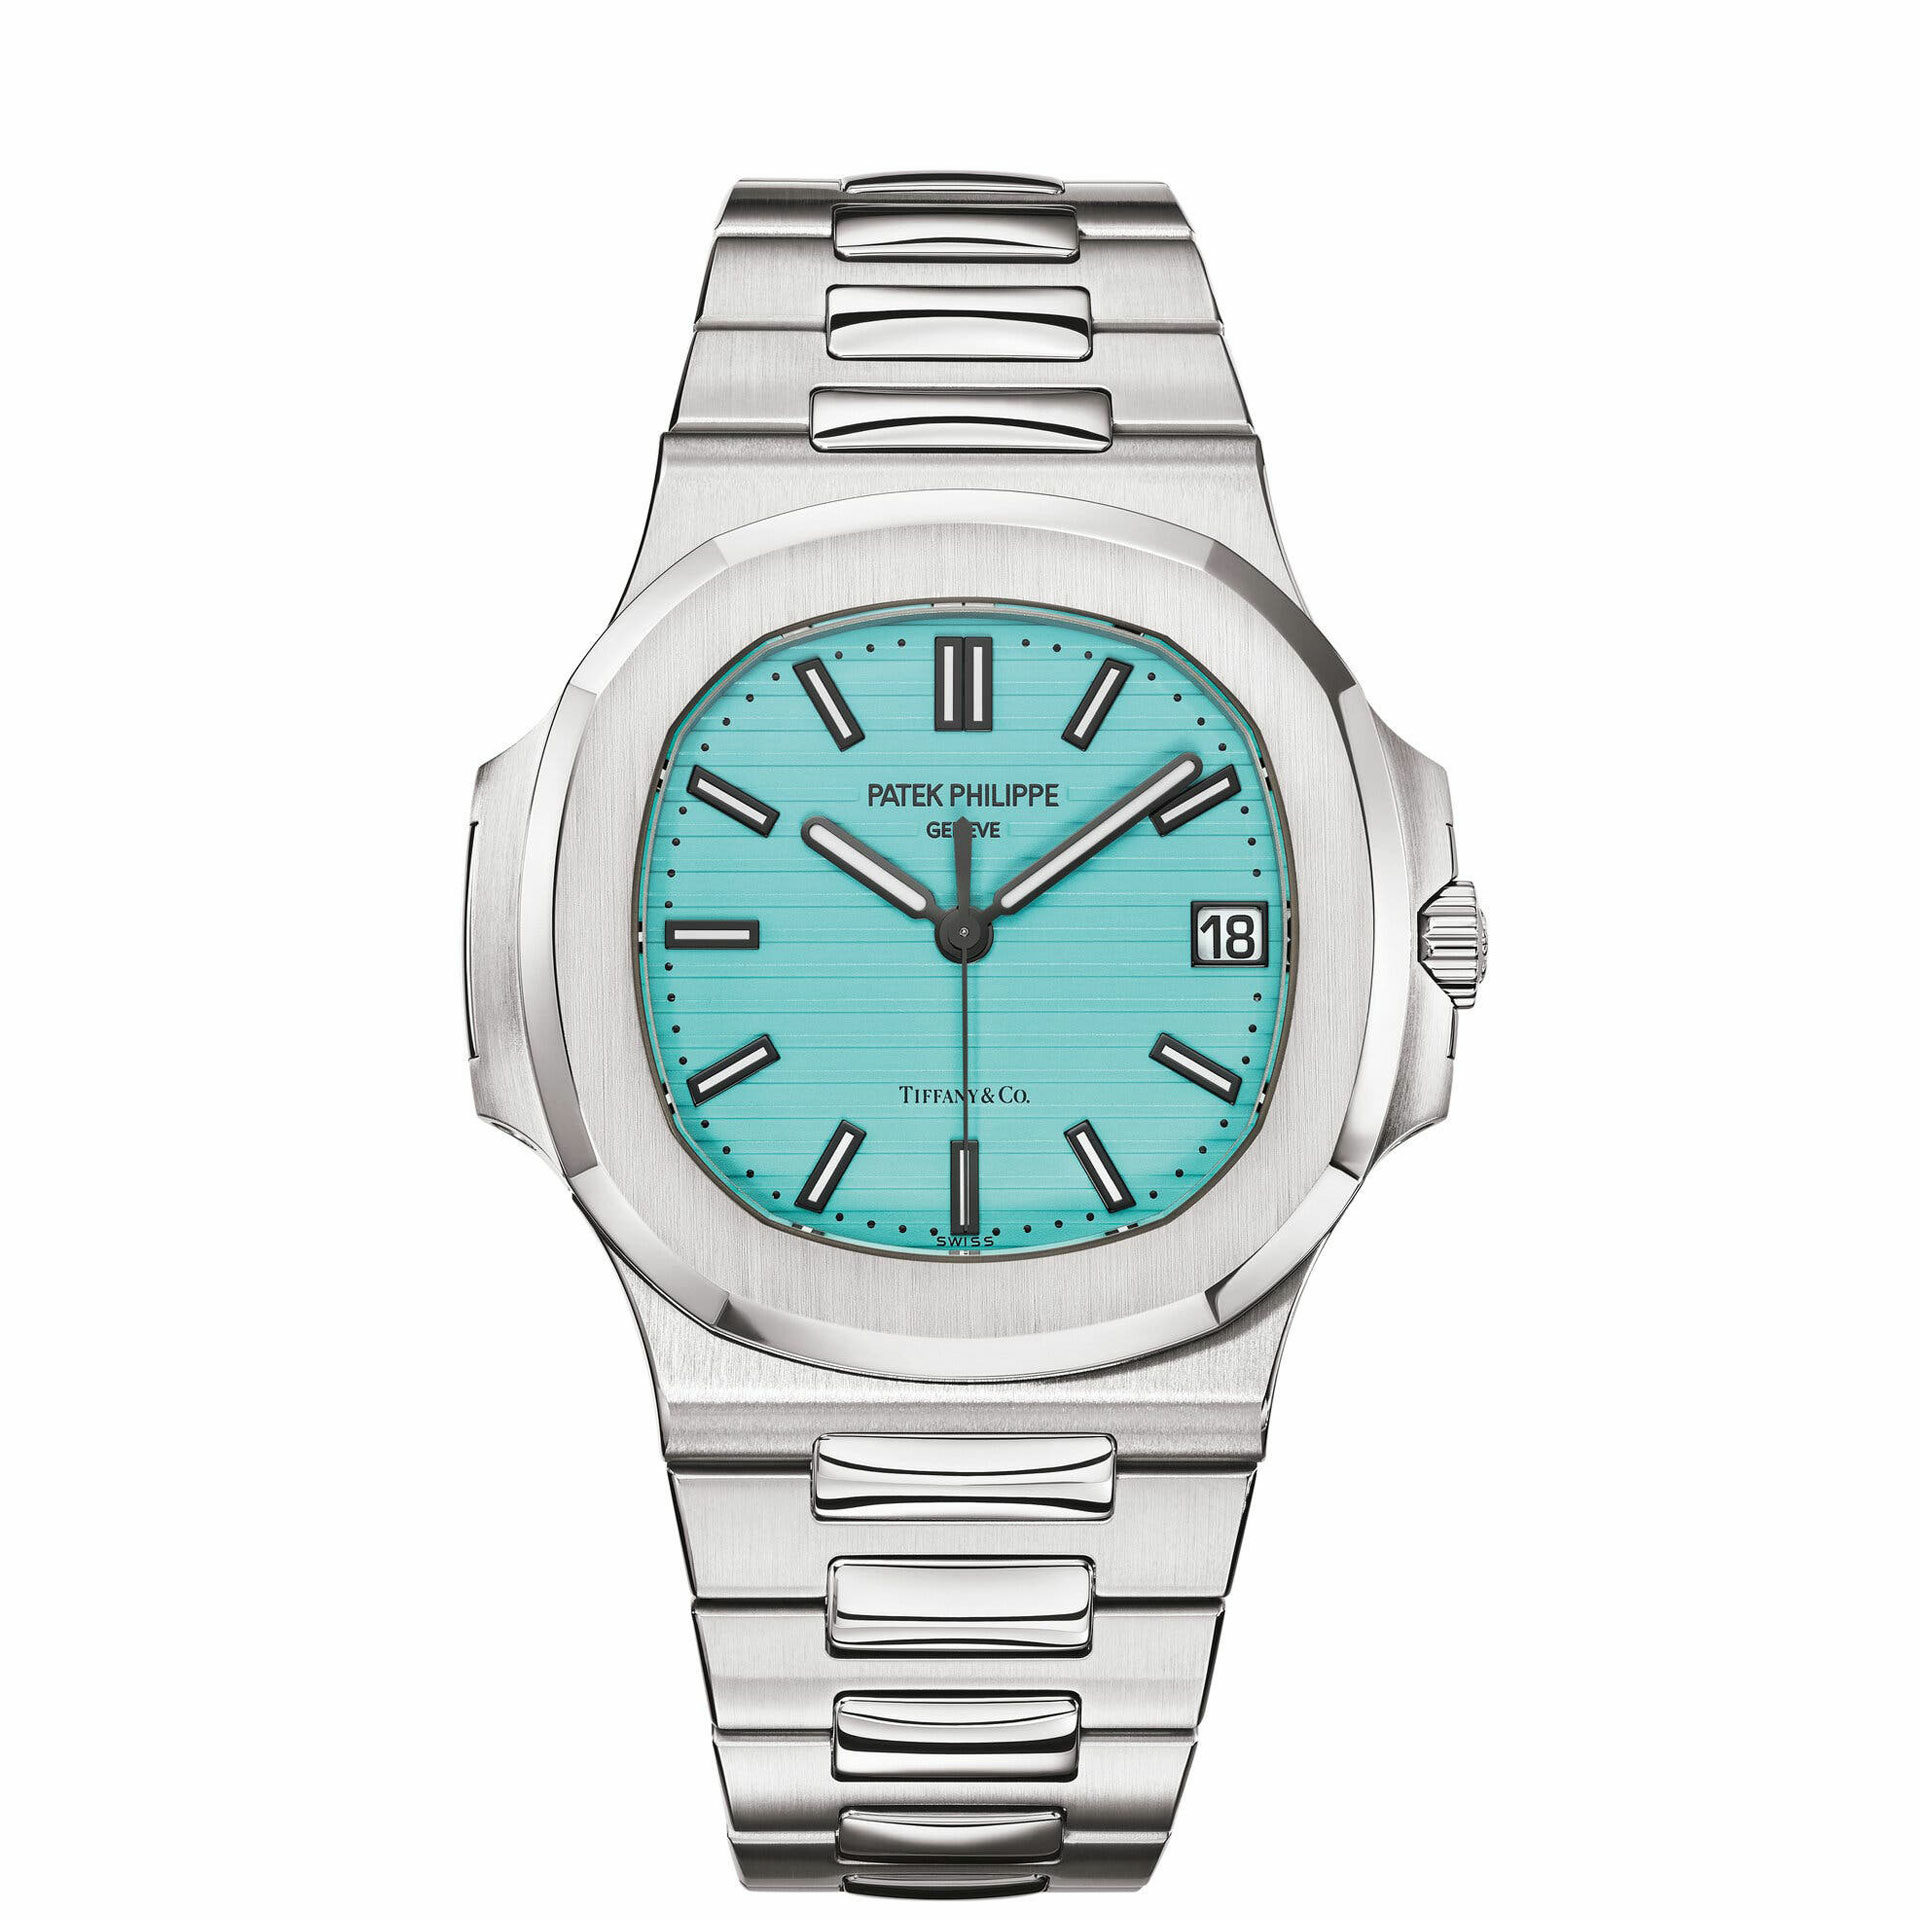 Patek Philippe Nautilus Ref. 5711/1A-018 Tiffany dial - most expensive watch in the world